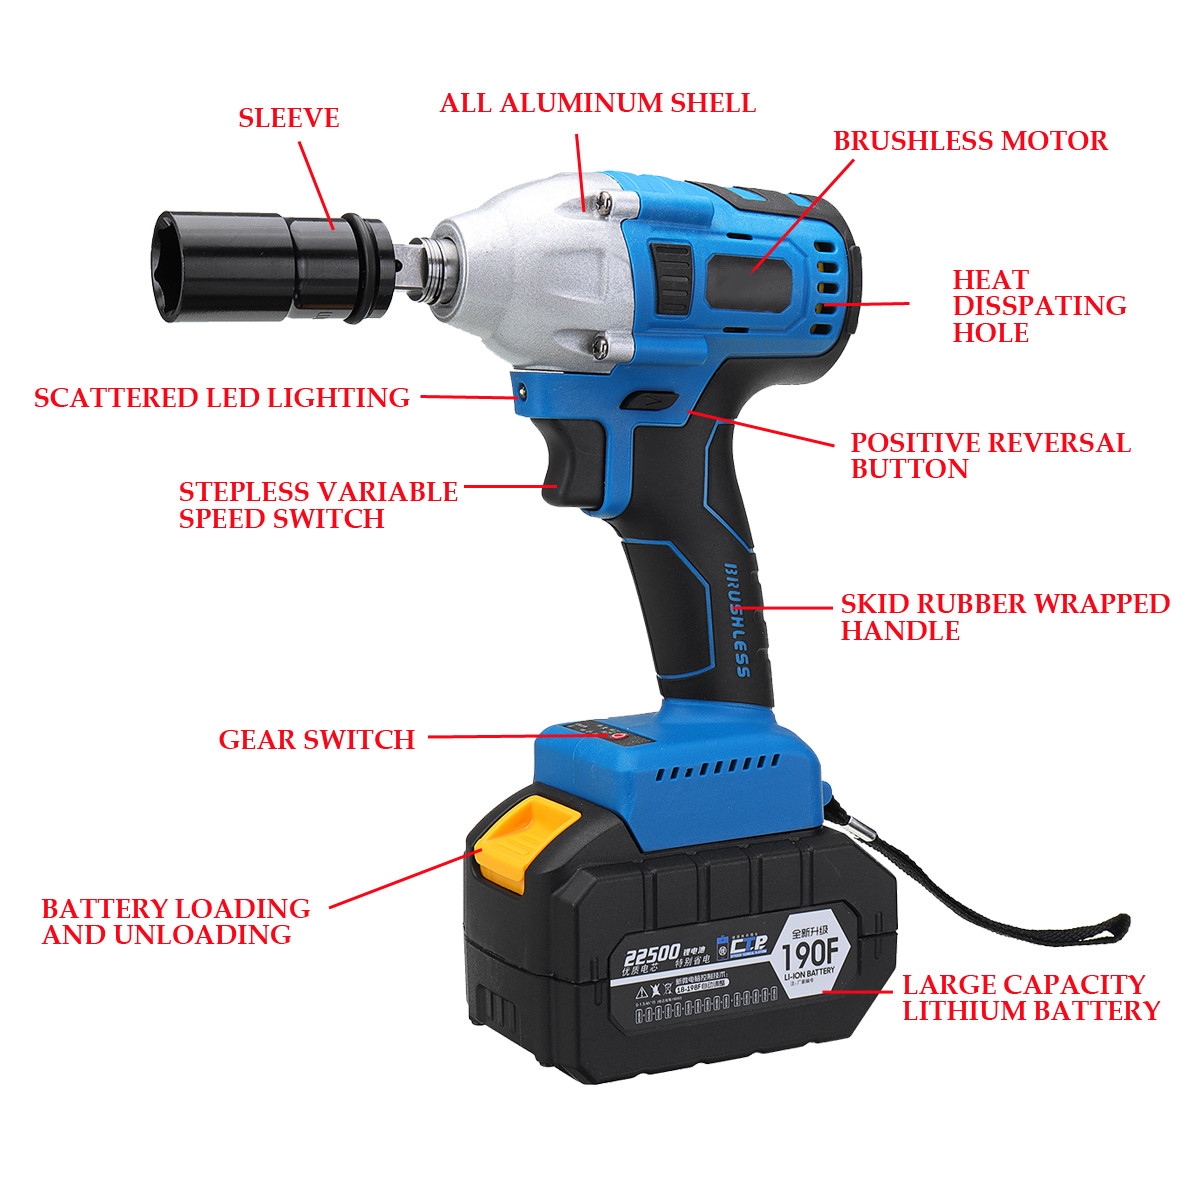 15000200002250030000-mAh-12-Inch-Cordless-Brushless-Electric-Impact-Wrench-Screwdriver-kit-with-2-Li-1413886-9